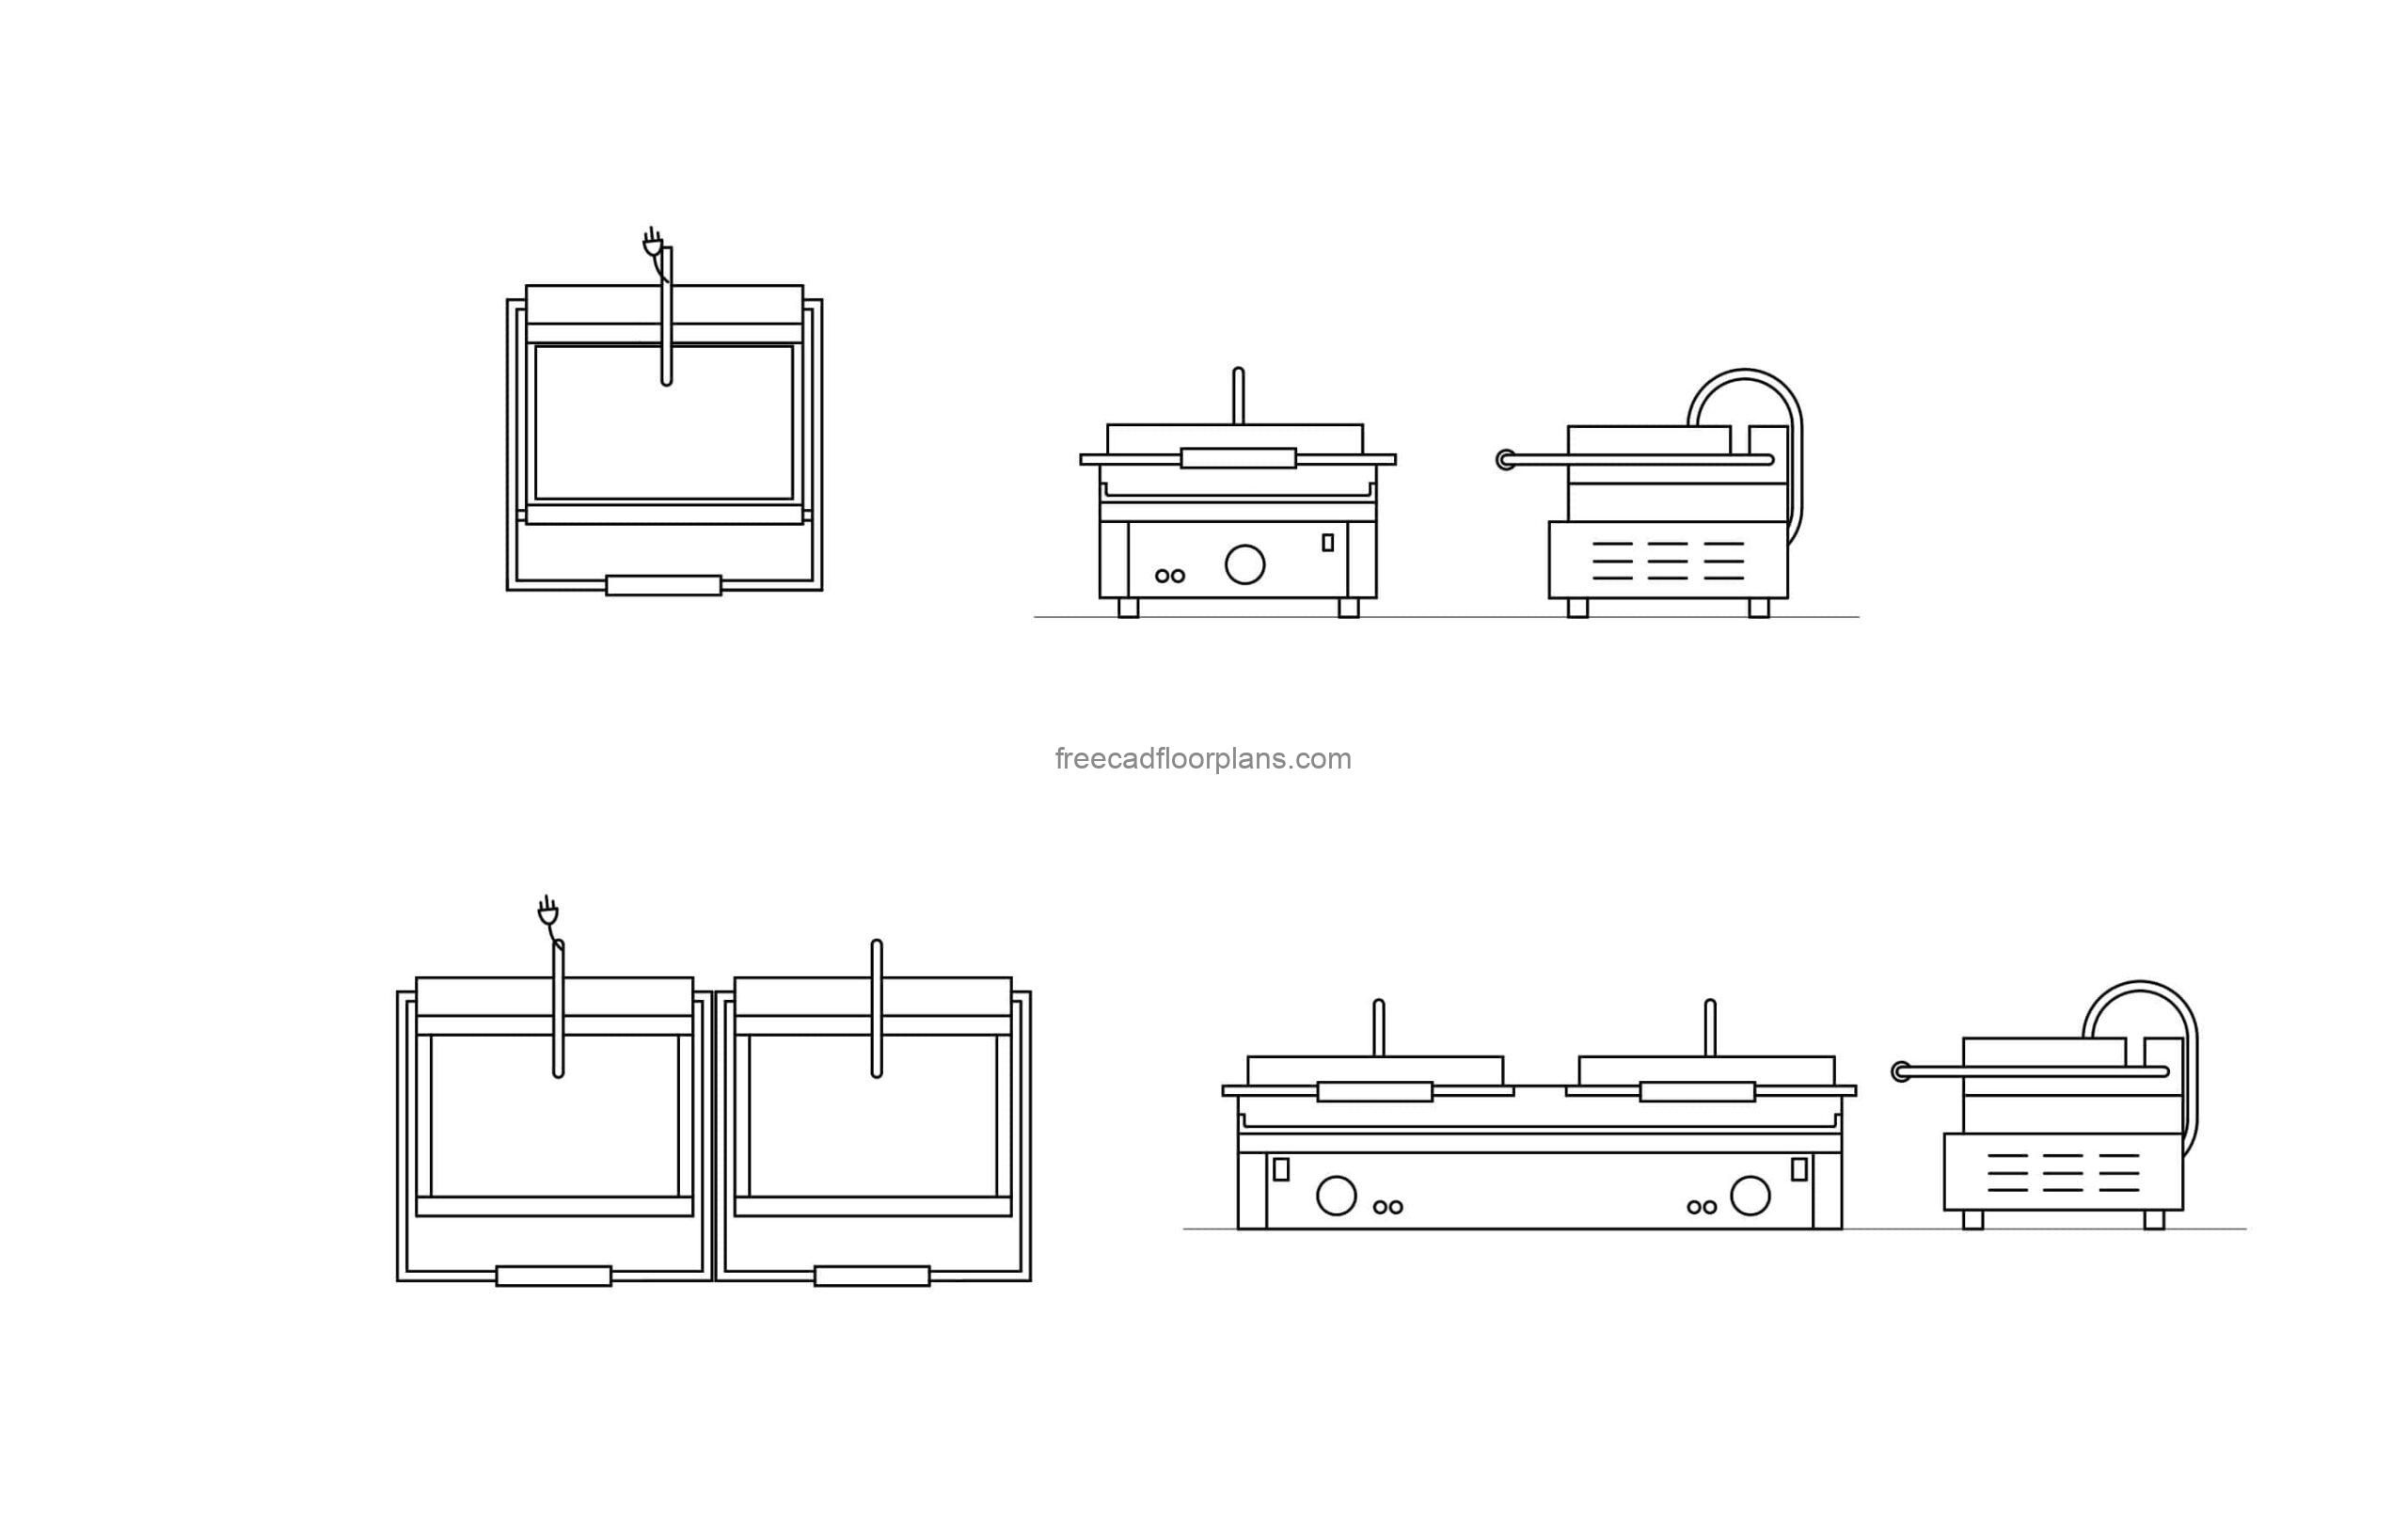 panini grill machine cad block dwg drawing elevation and plan views file for free download with drawing details, equipment for industrial kitchen